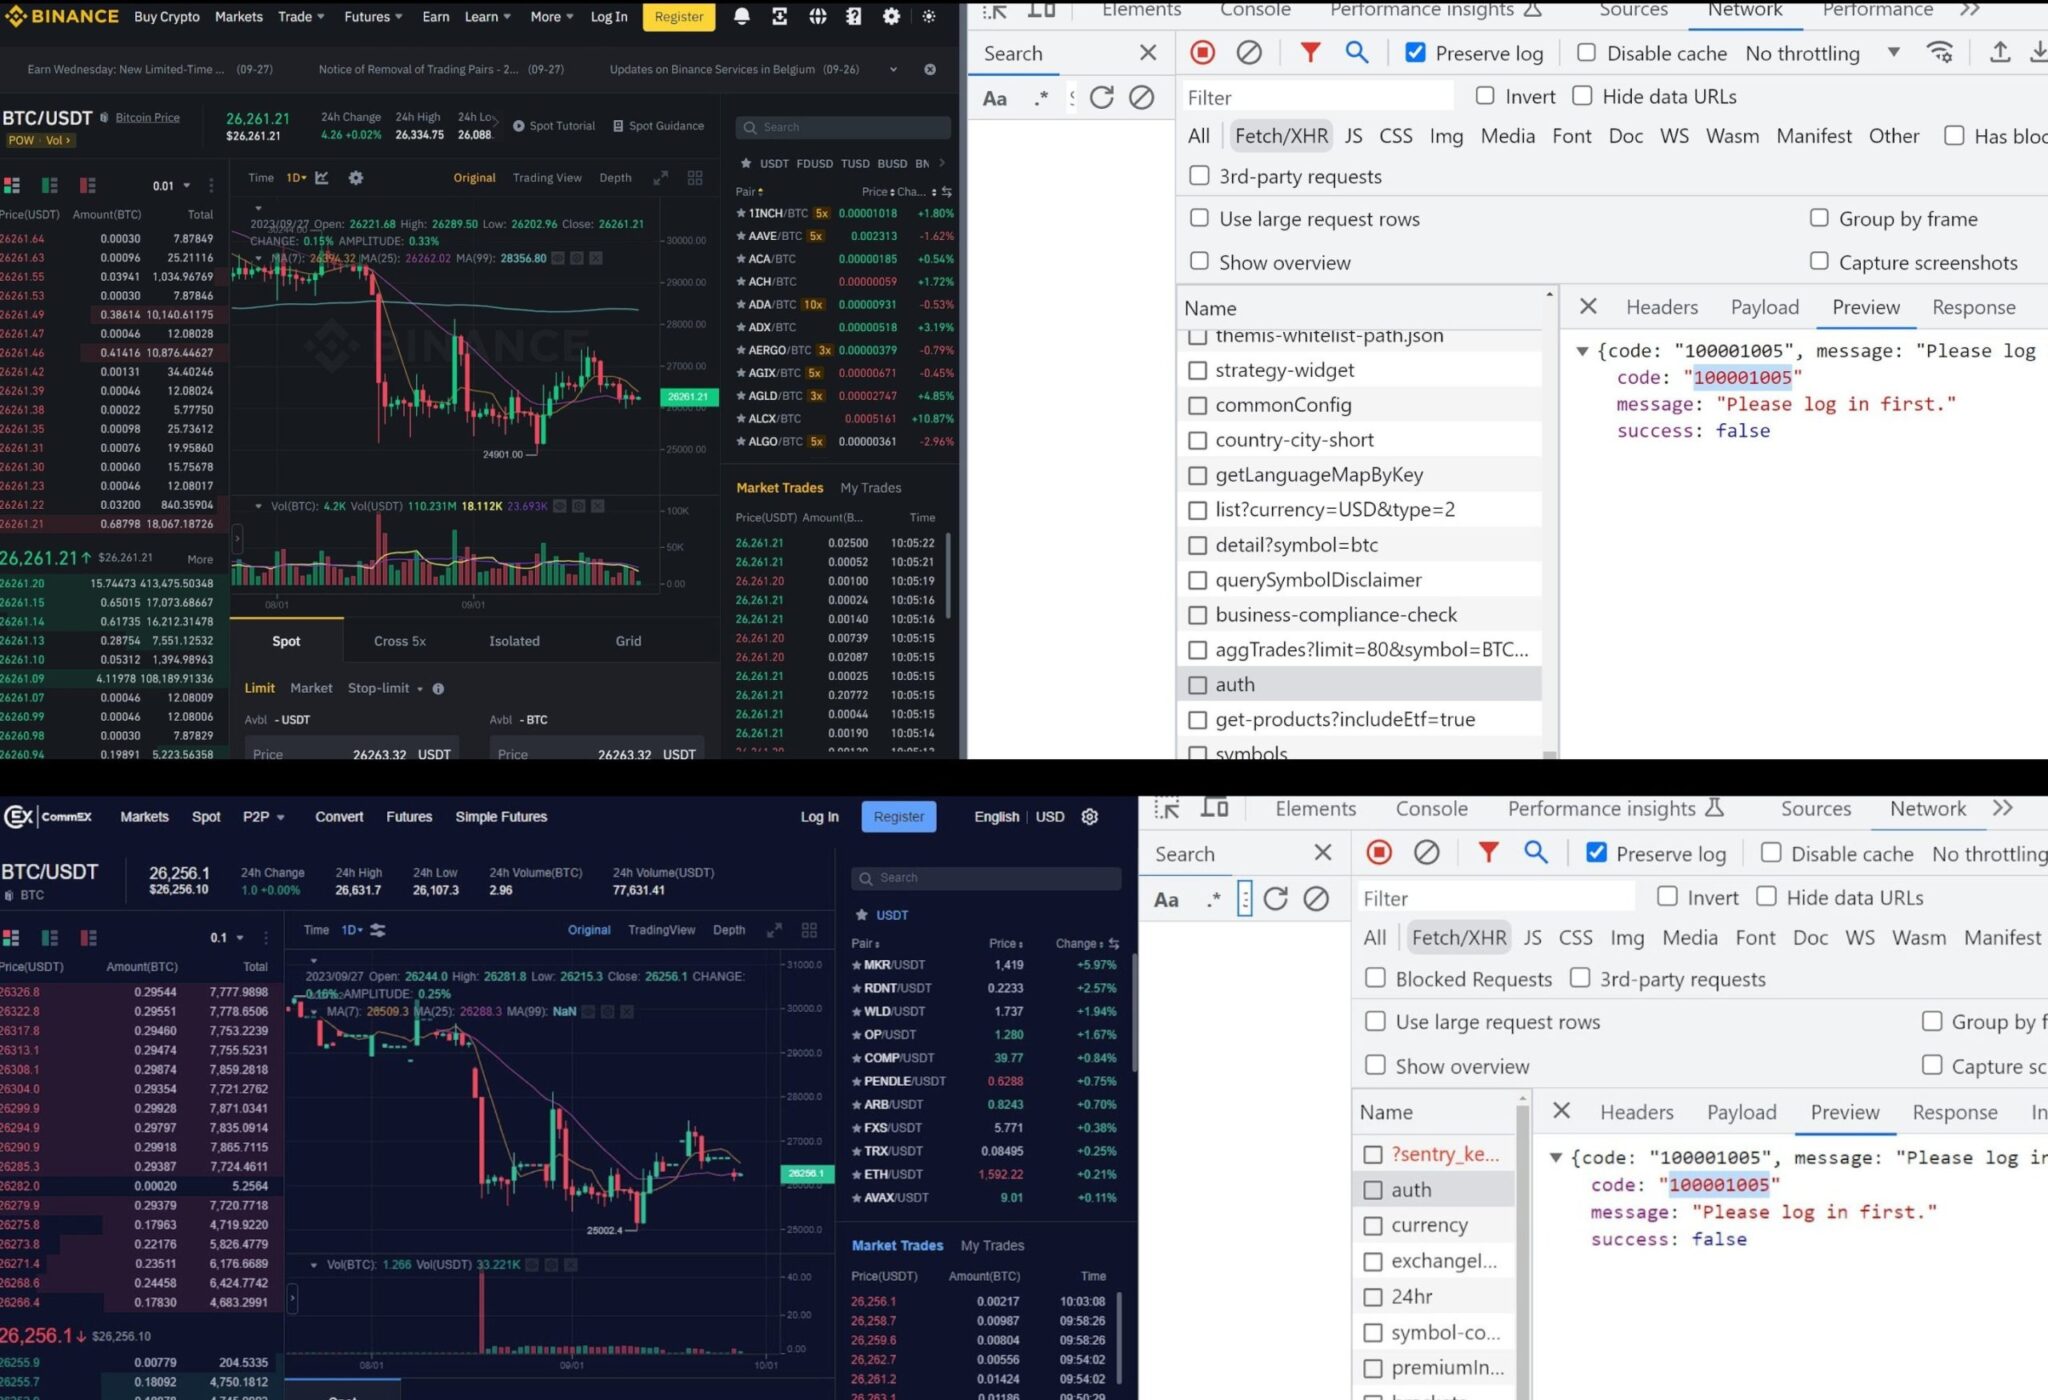 Binance (top) and CommEX (bottom) trading interface